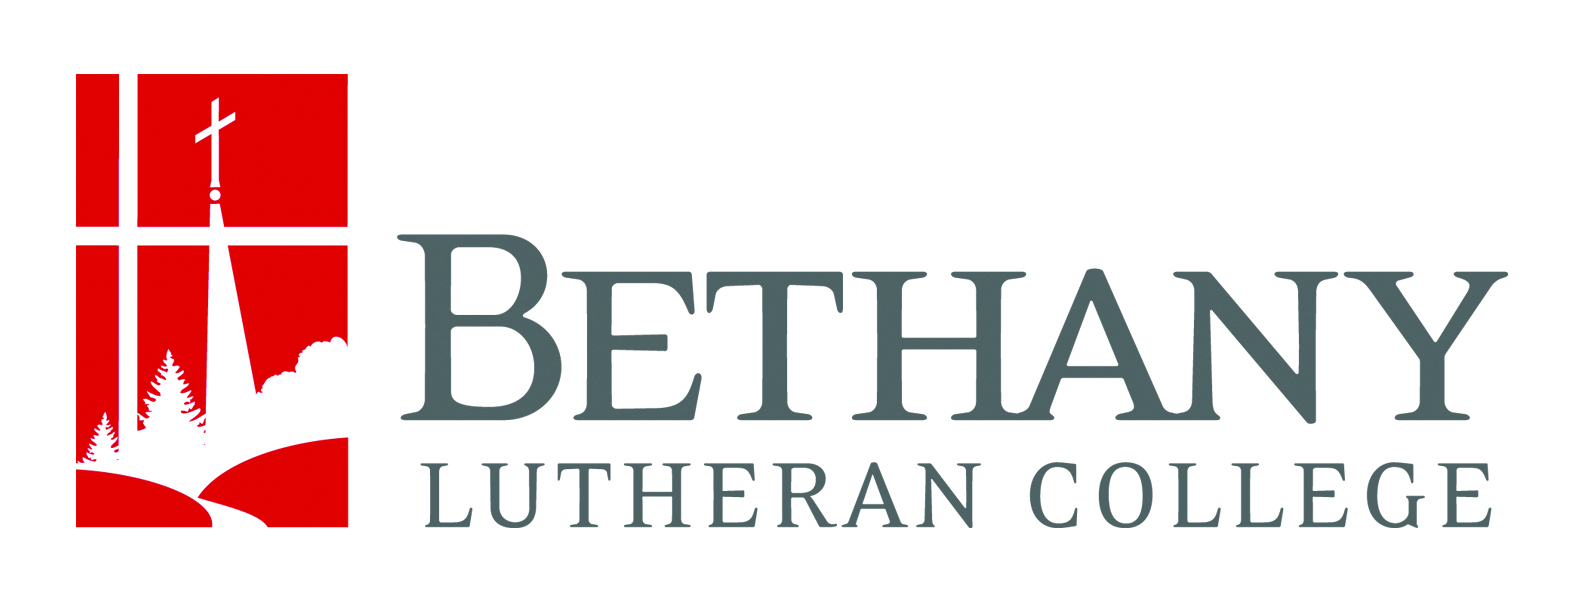 Bethany Lutheran College 